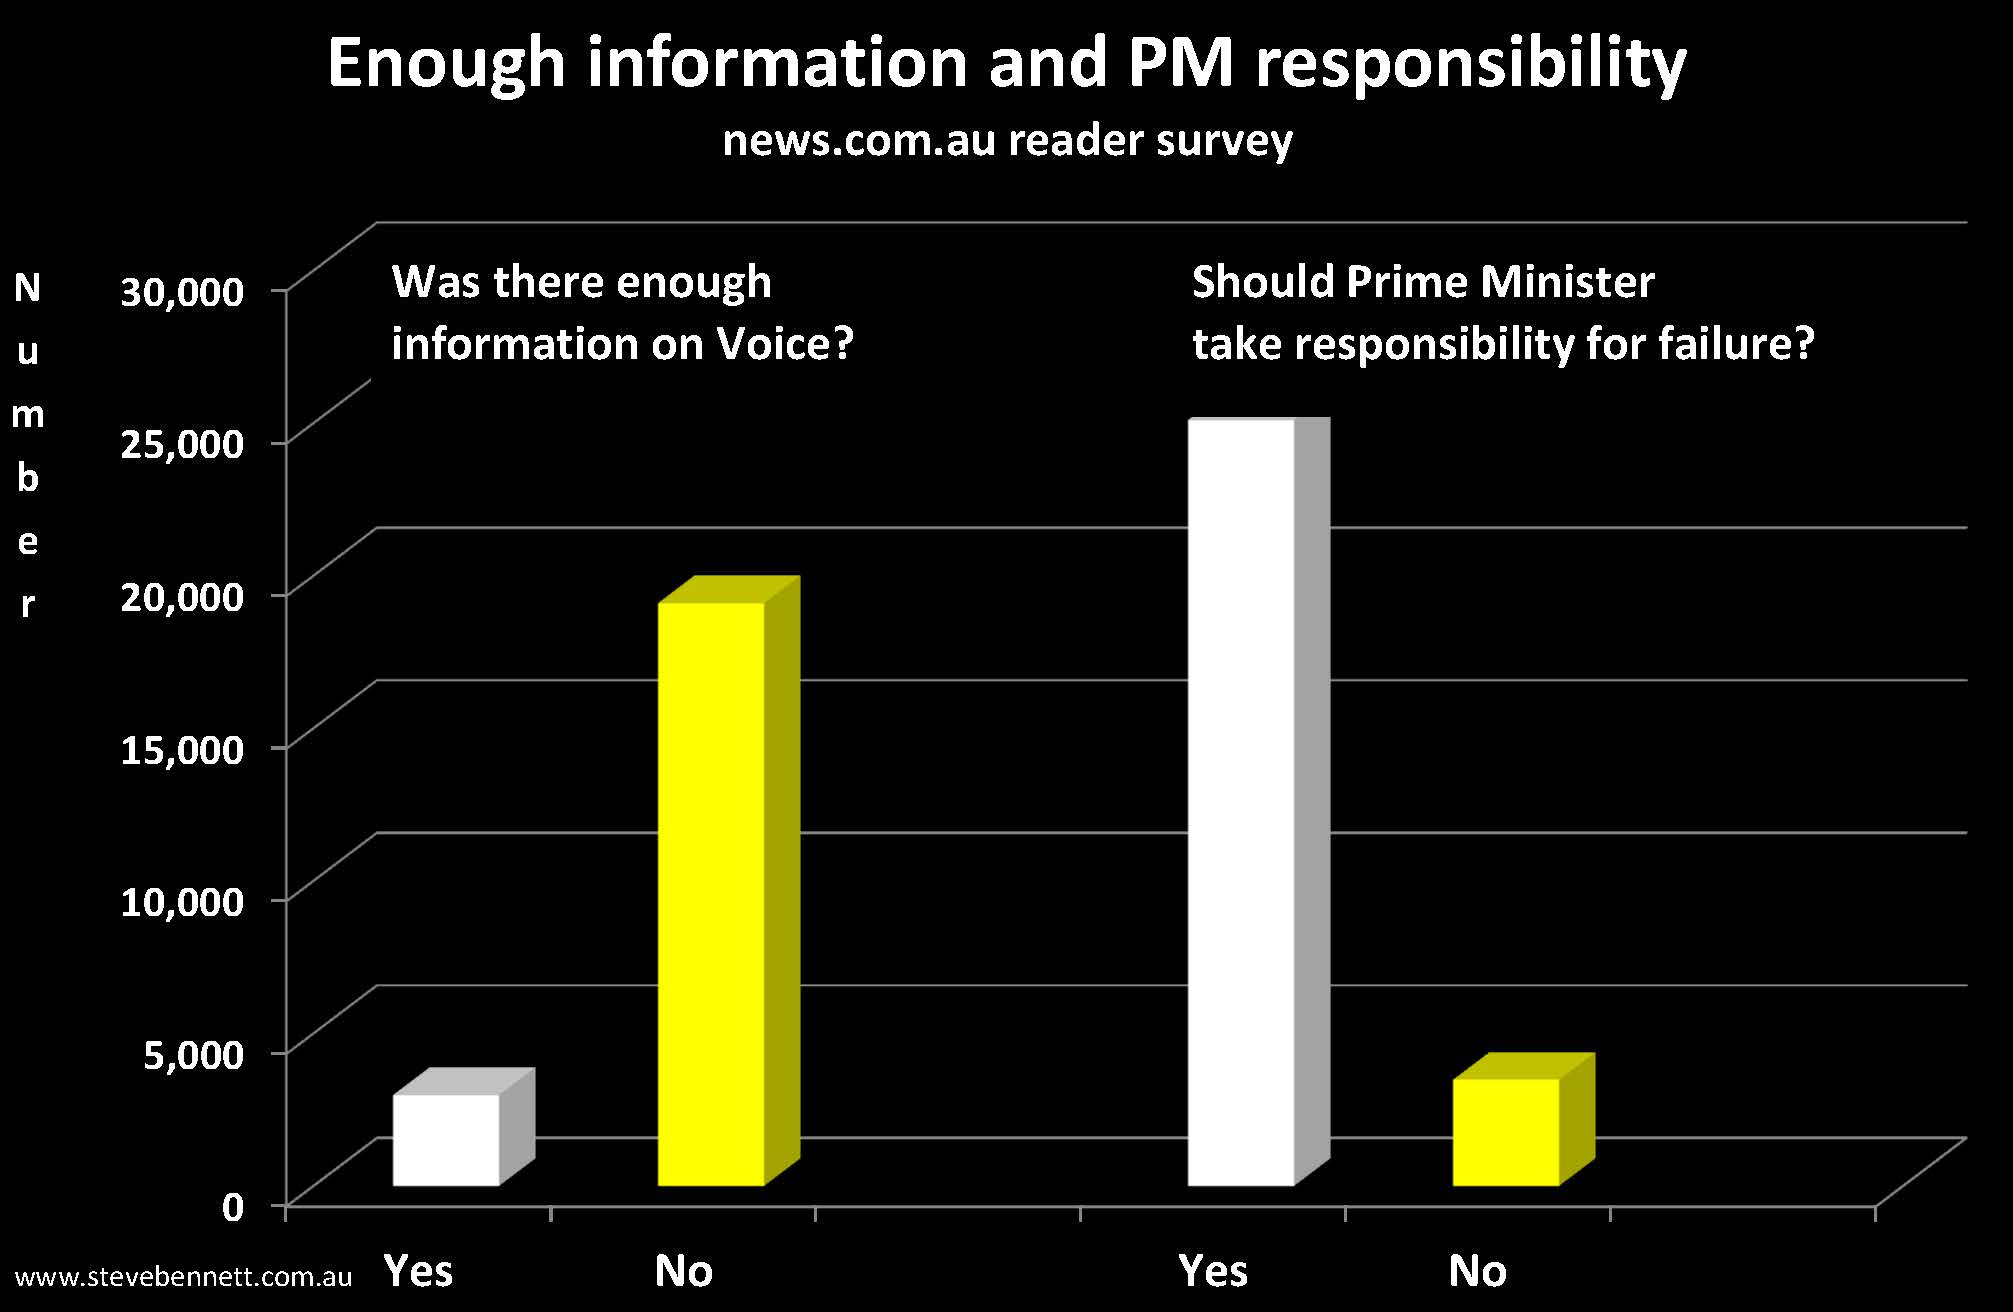 news.com.au survey response to questions about information availability and PM responsibility